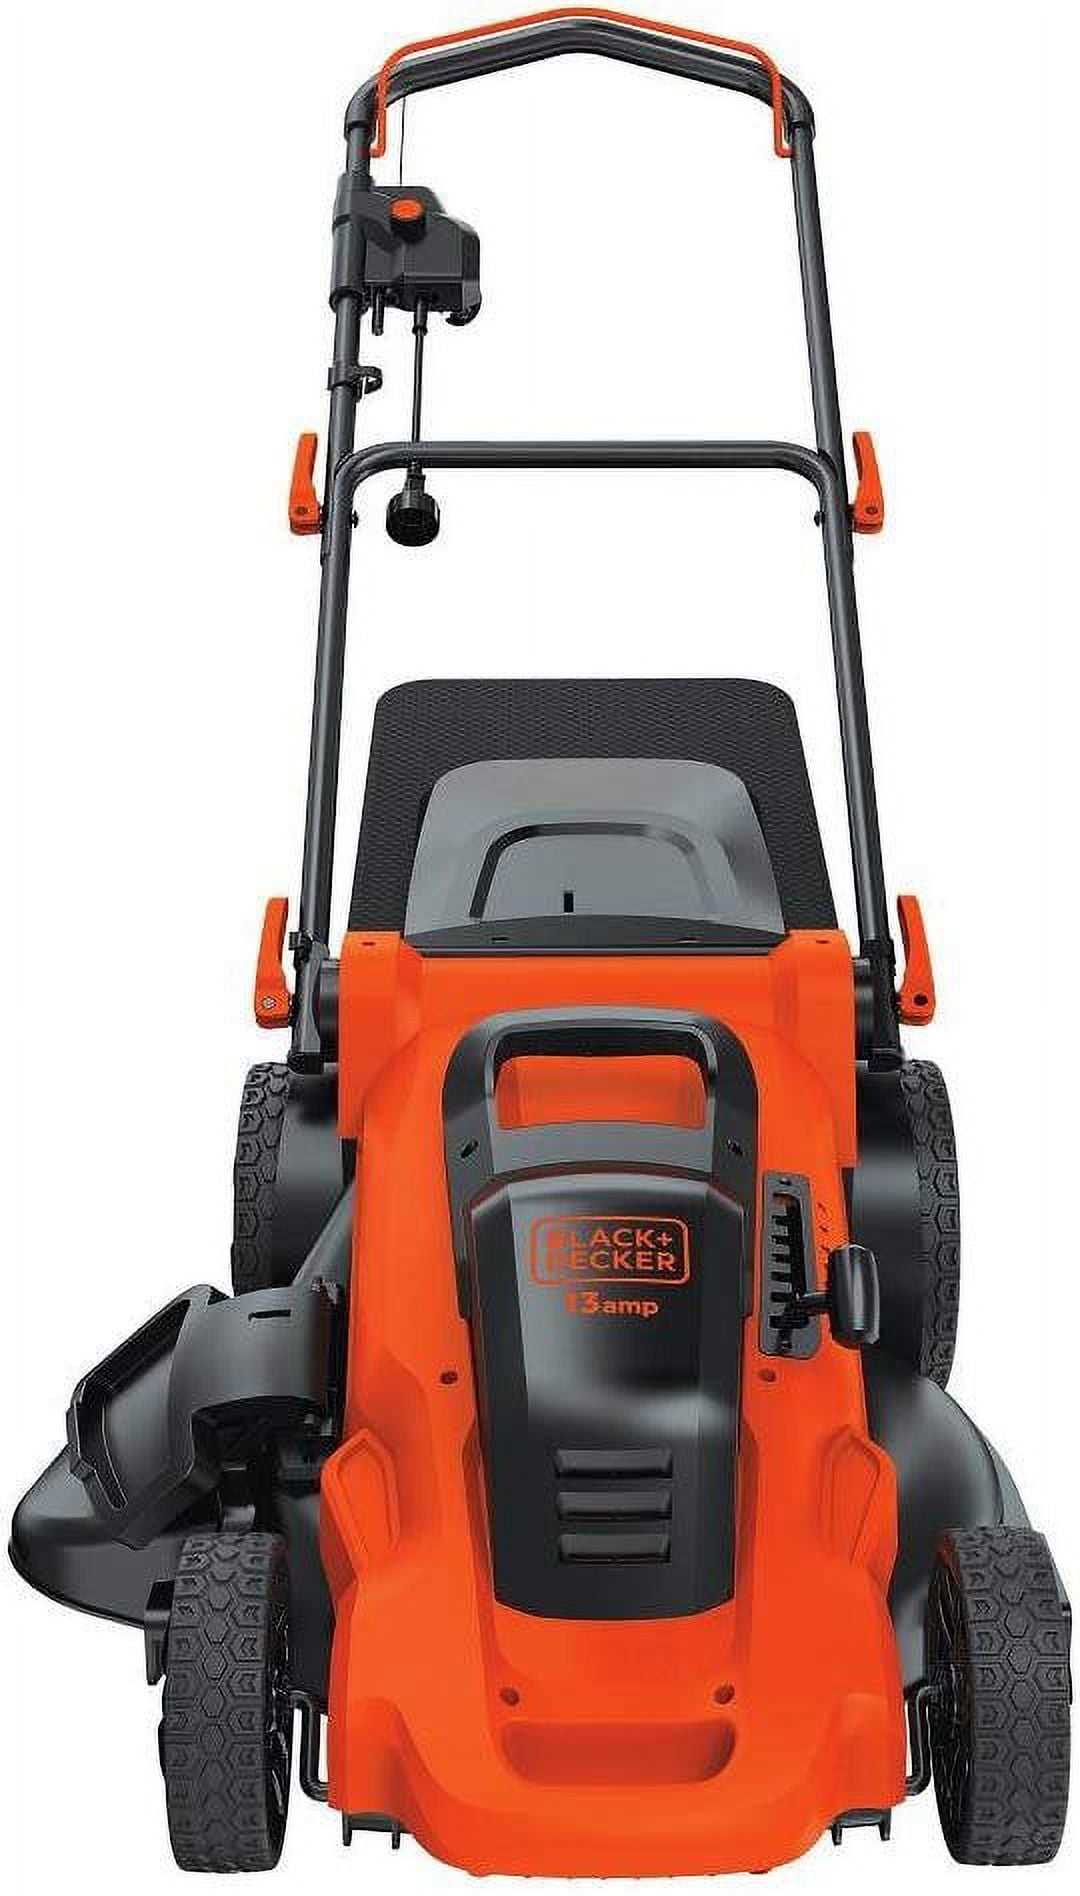 BLACK+DECKER Electric Lawn Mower, 13-Amp, Corded - general for sale - by  owner - craigslist